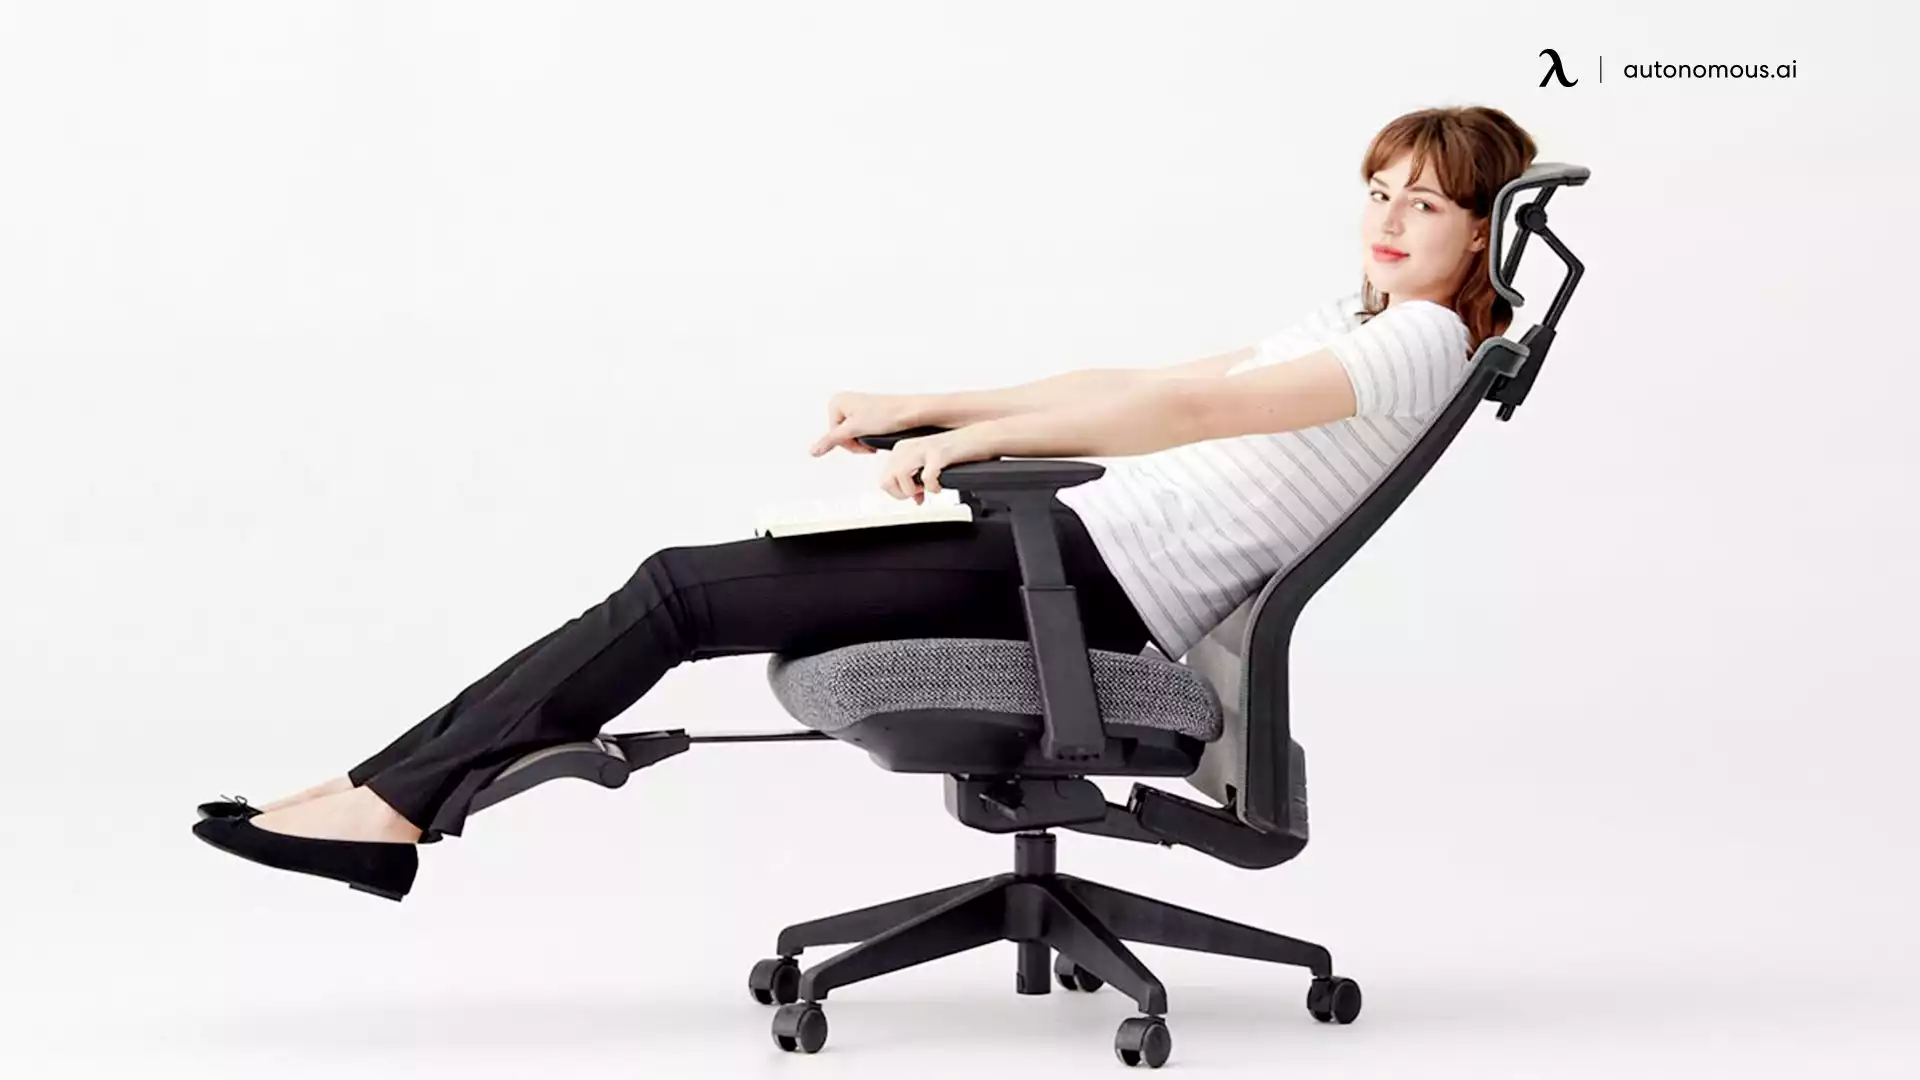 Fixed Lumbar Support in Office Chairs